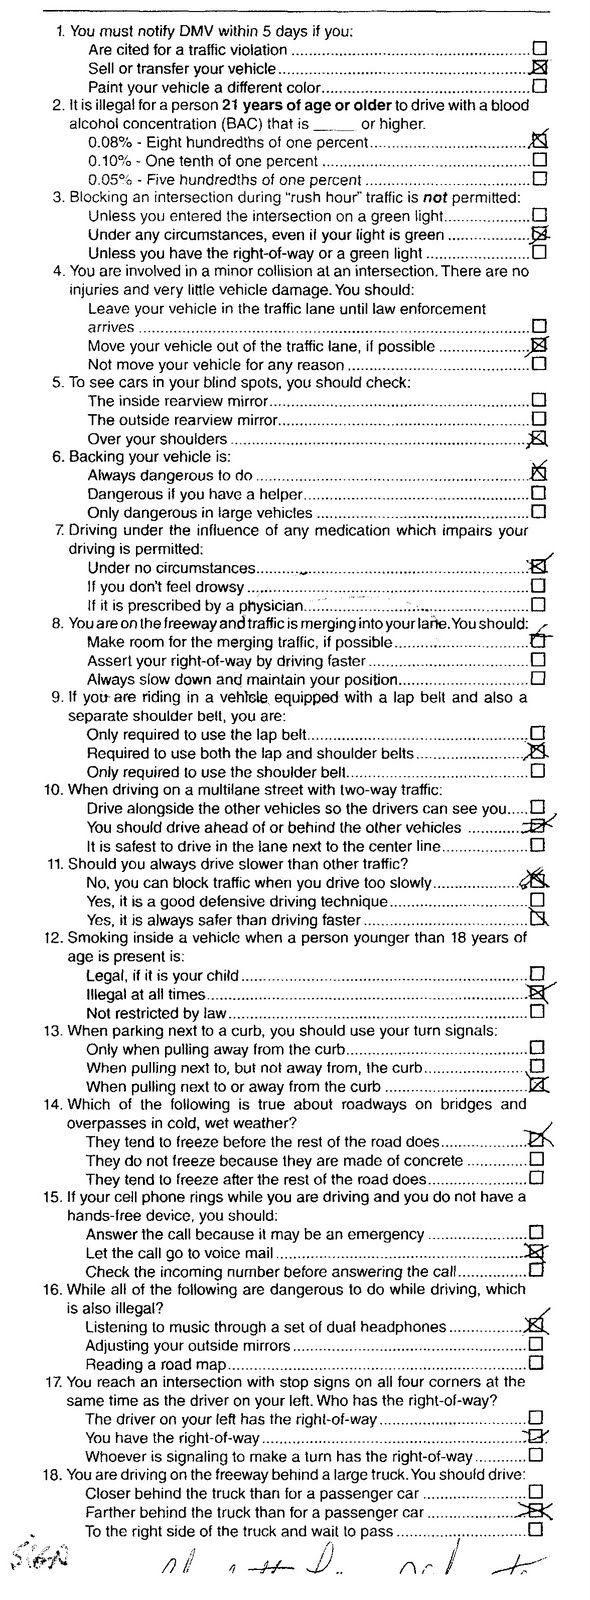 sample questions california driving test